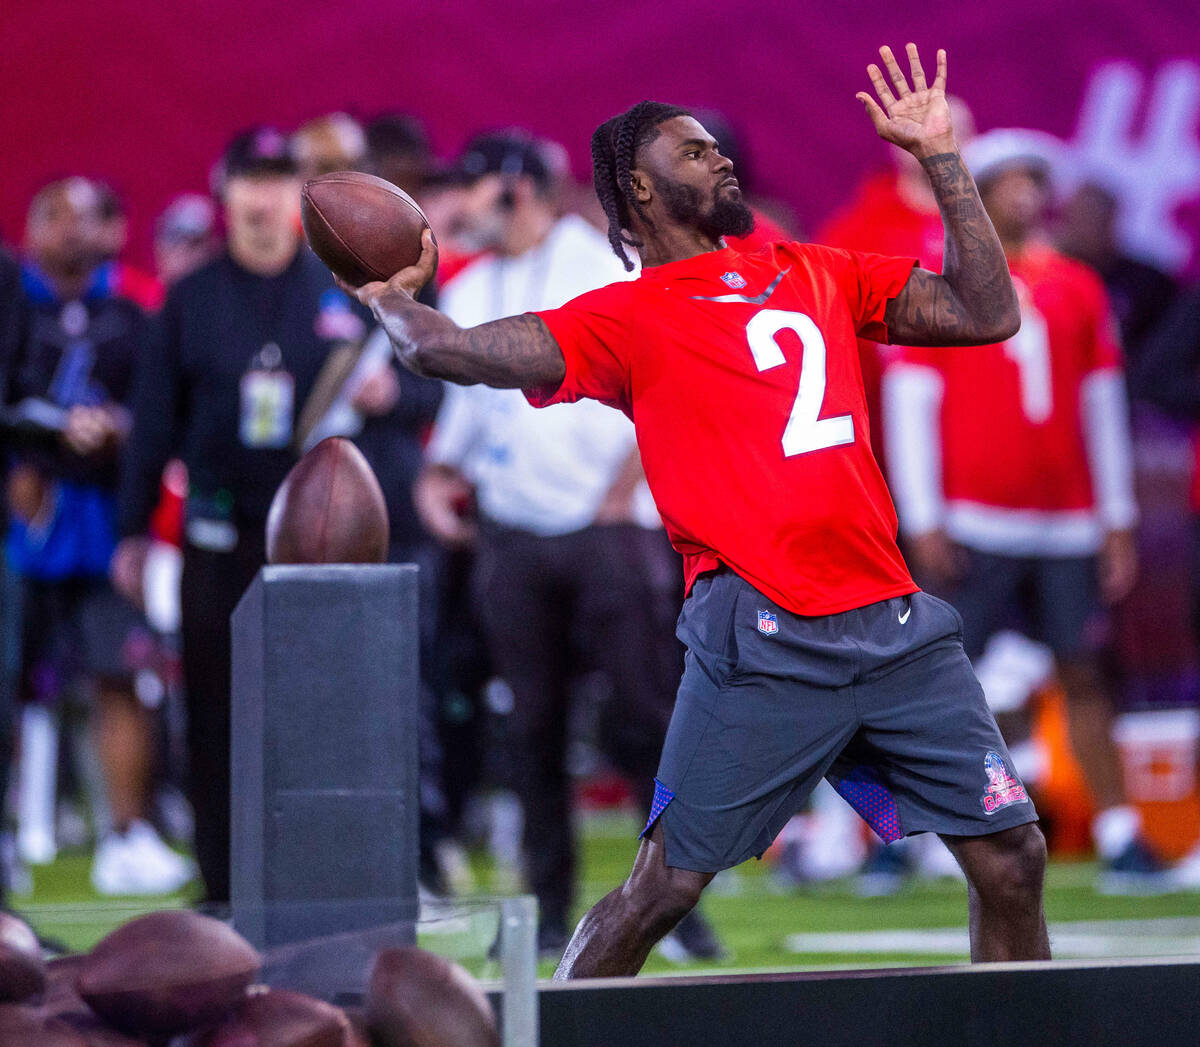 The AFC's Tyler Huntley (2) of the Ravens gets off a throw in a precision pass event during the ...